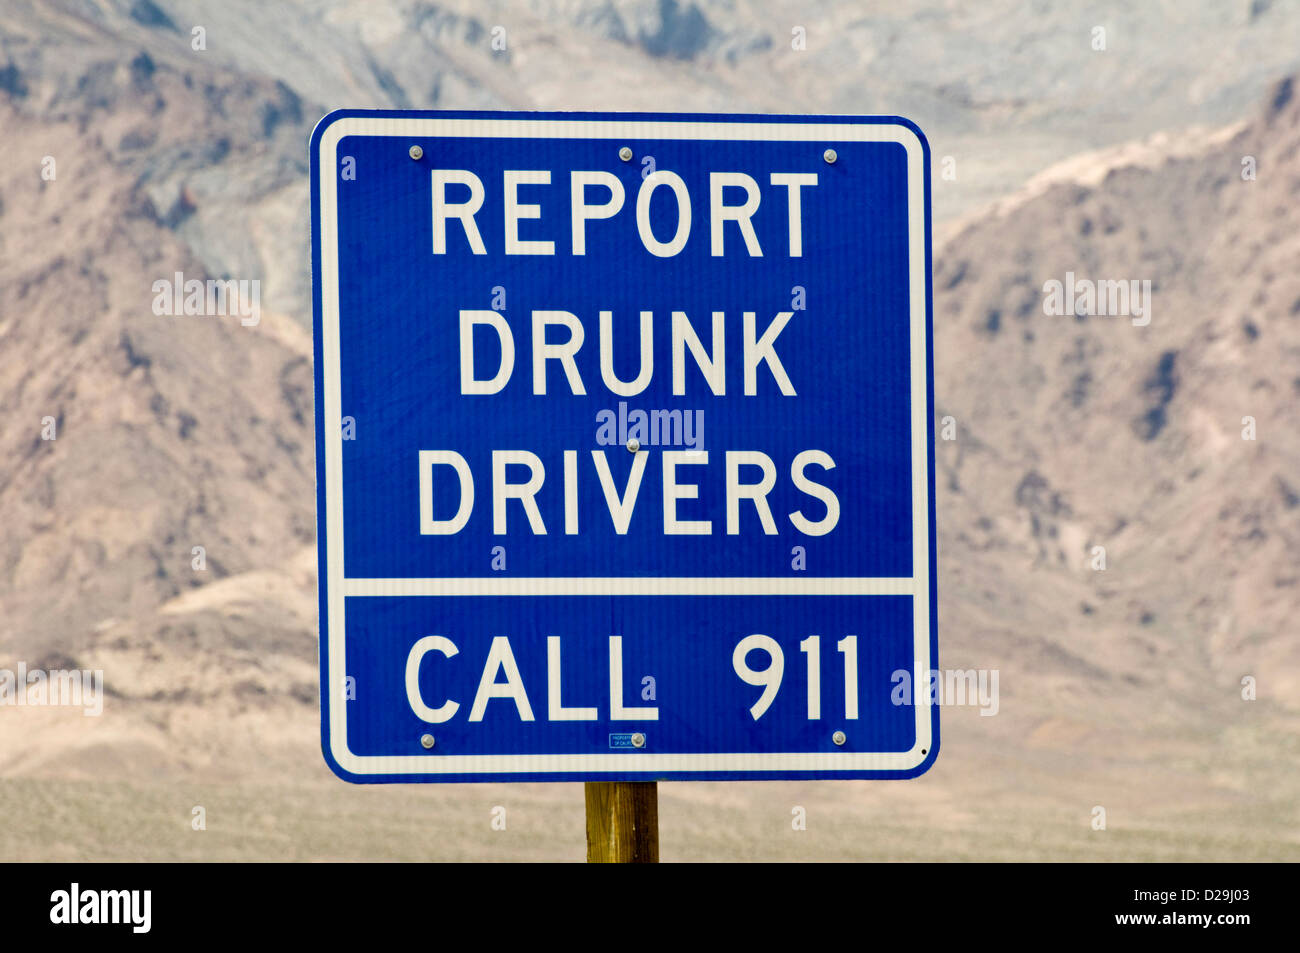 Report drunk drivers sign Stock Photo